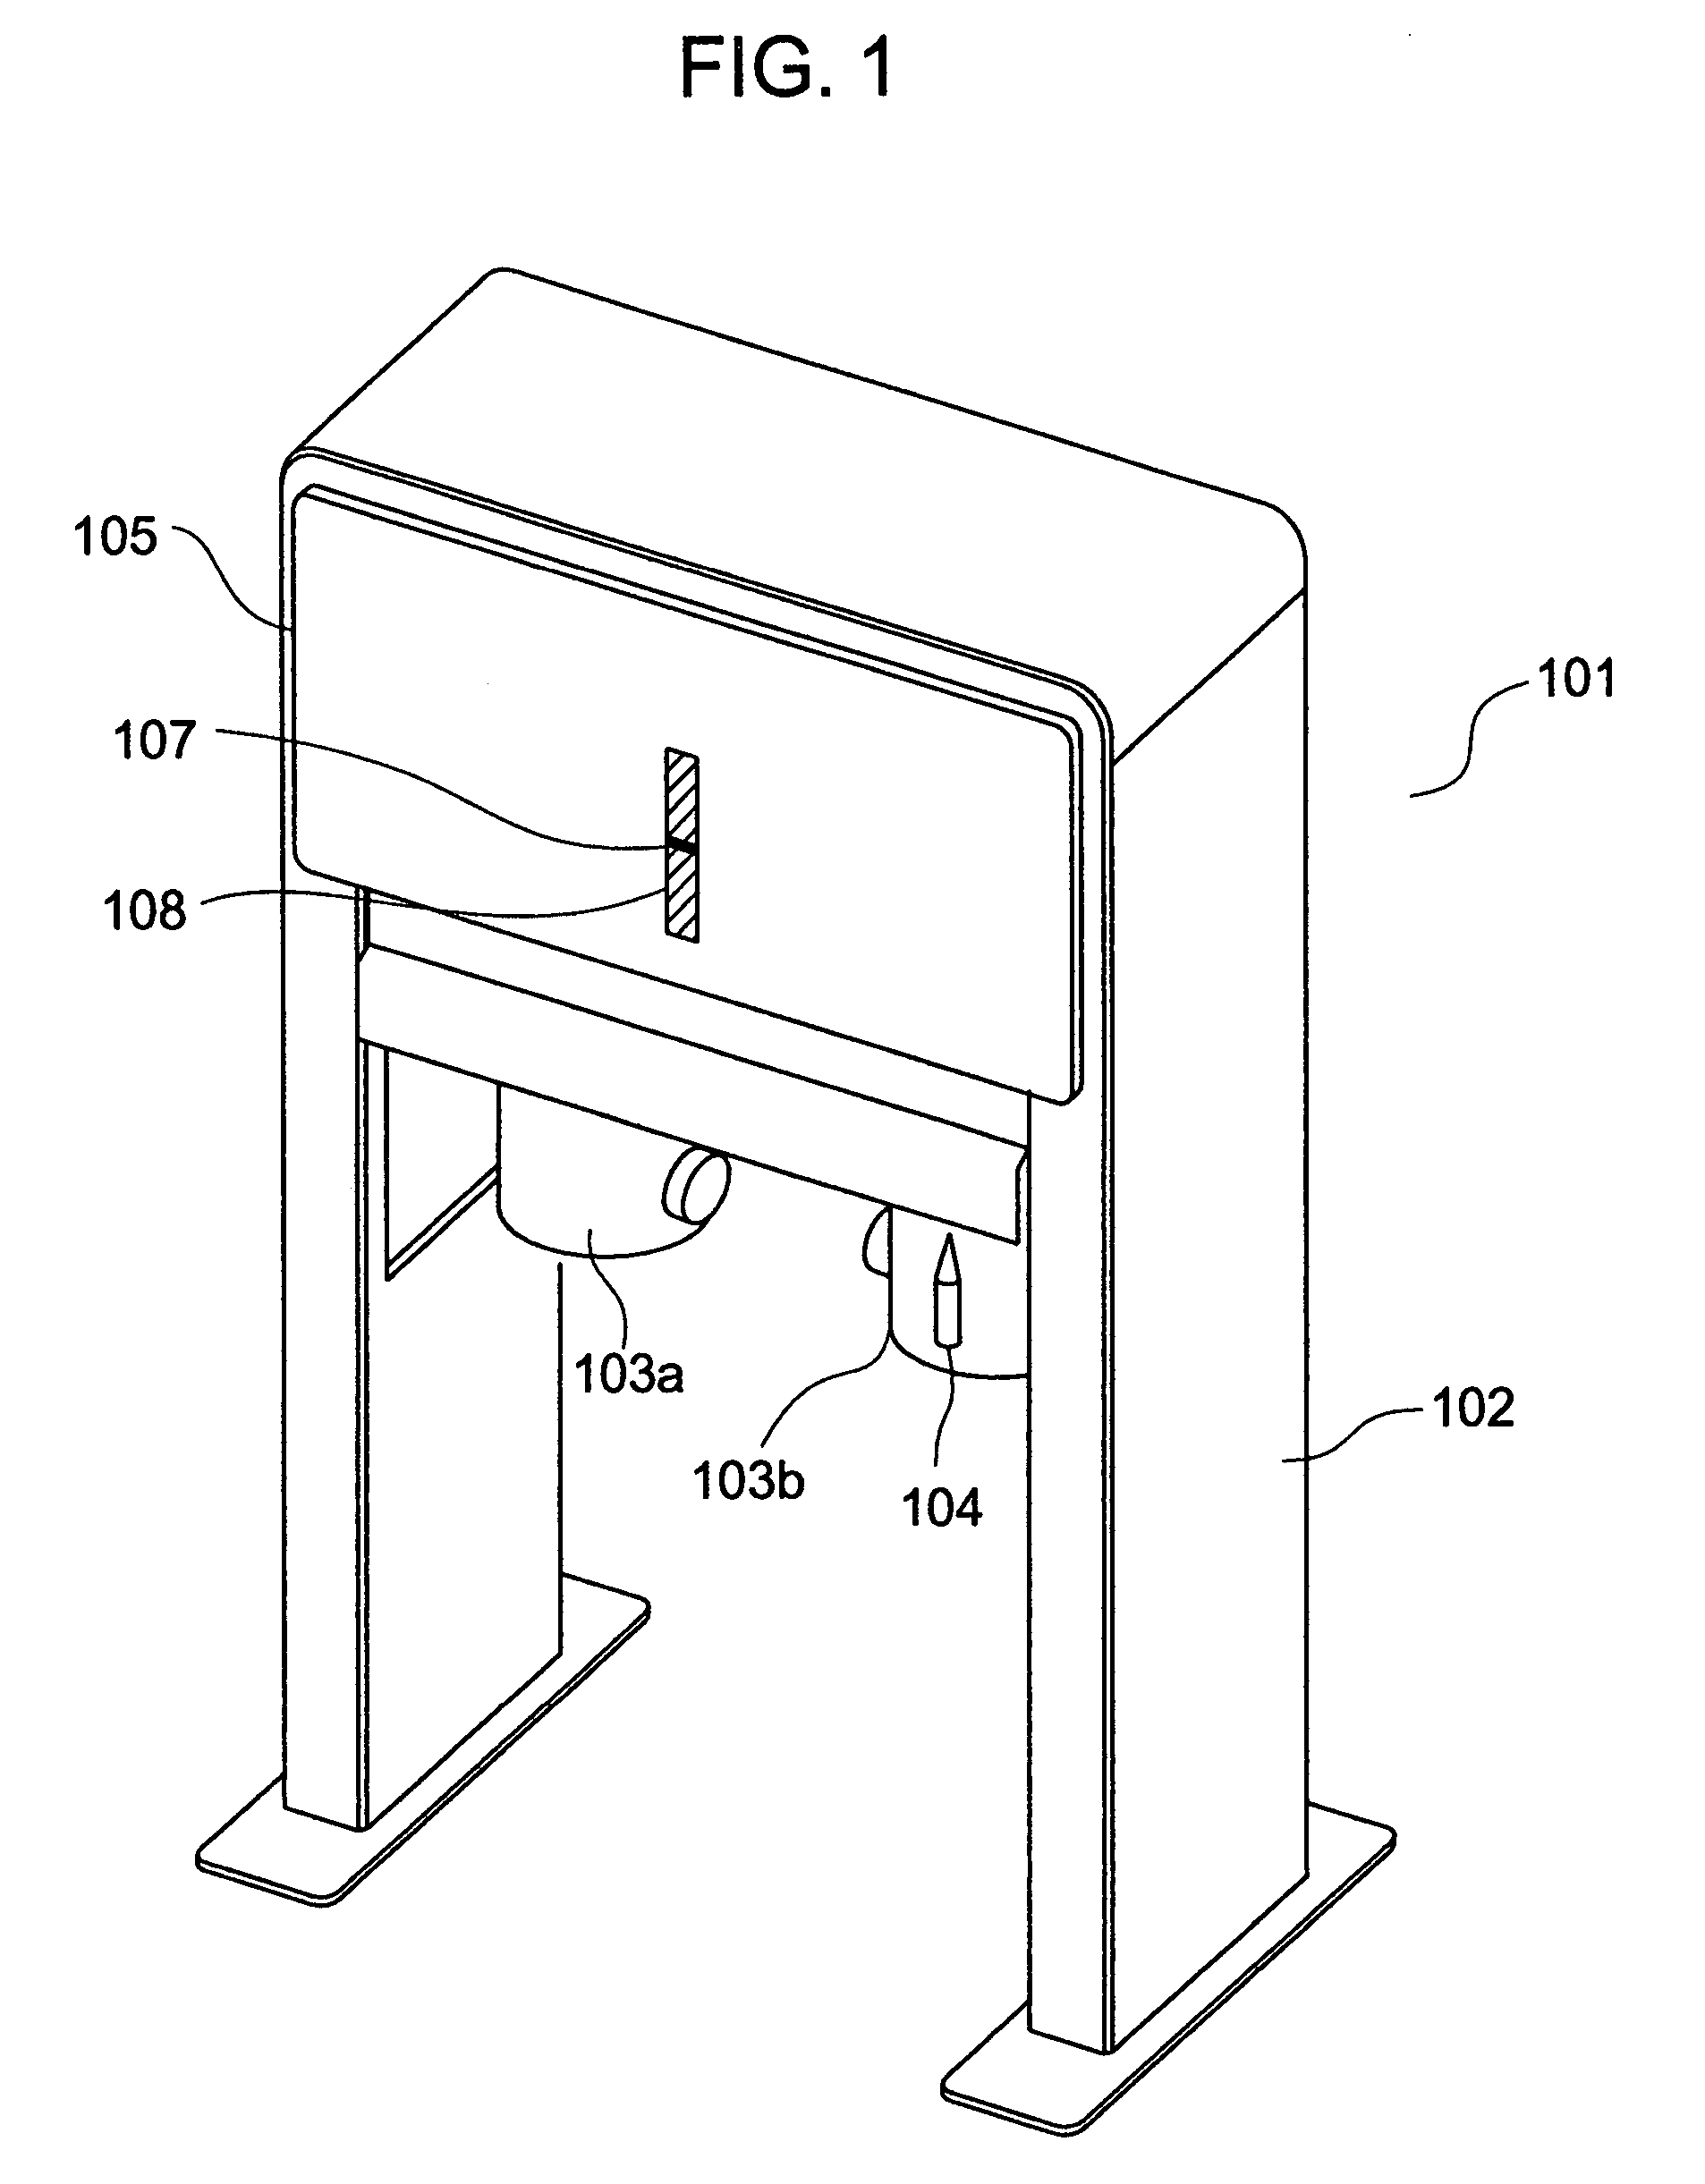 Biomagnetic field measurement apparatus having a plurality of magnetic pick-up coils